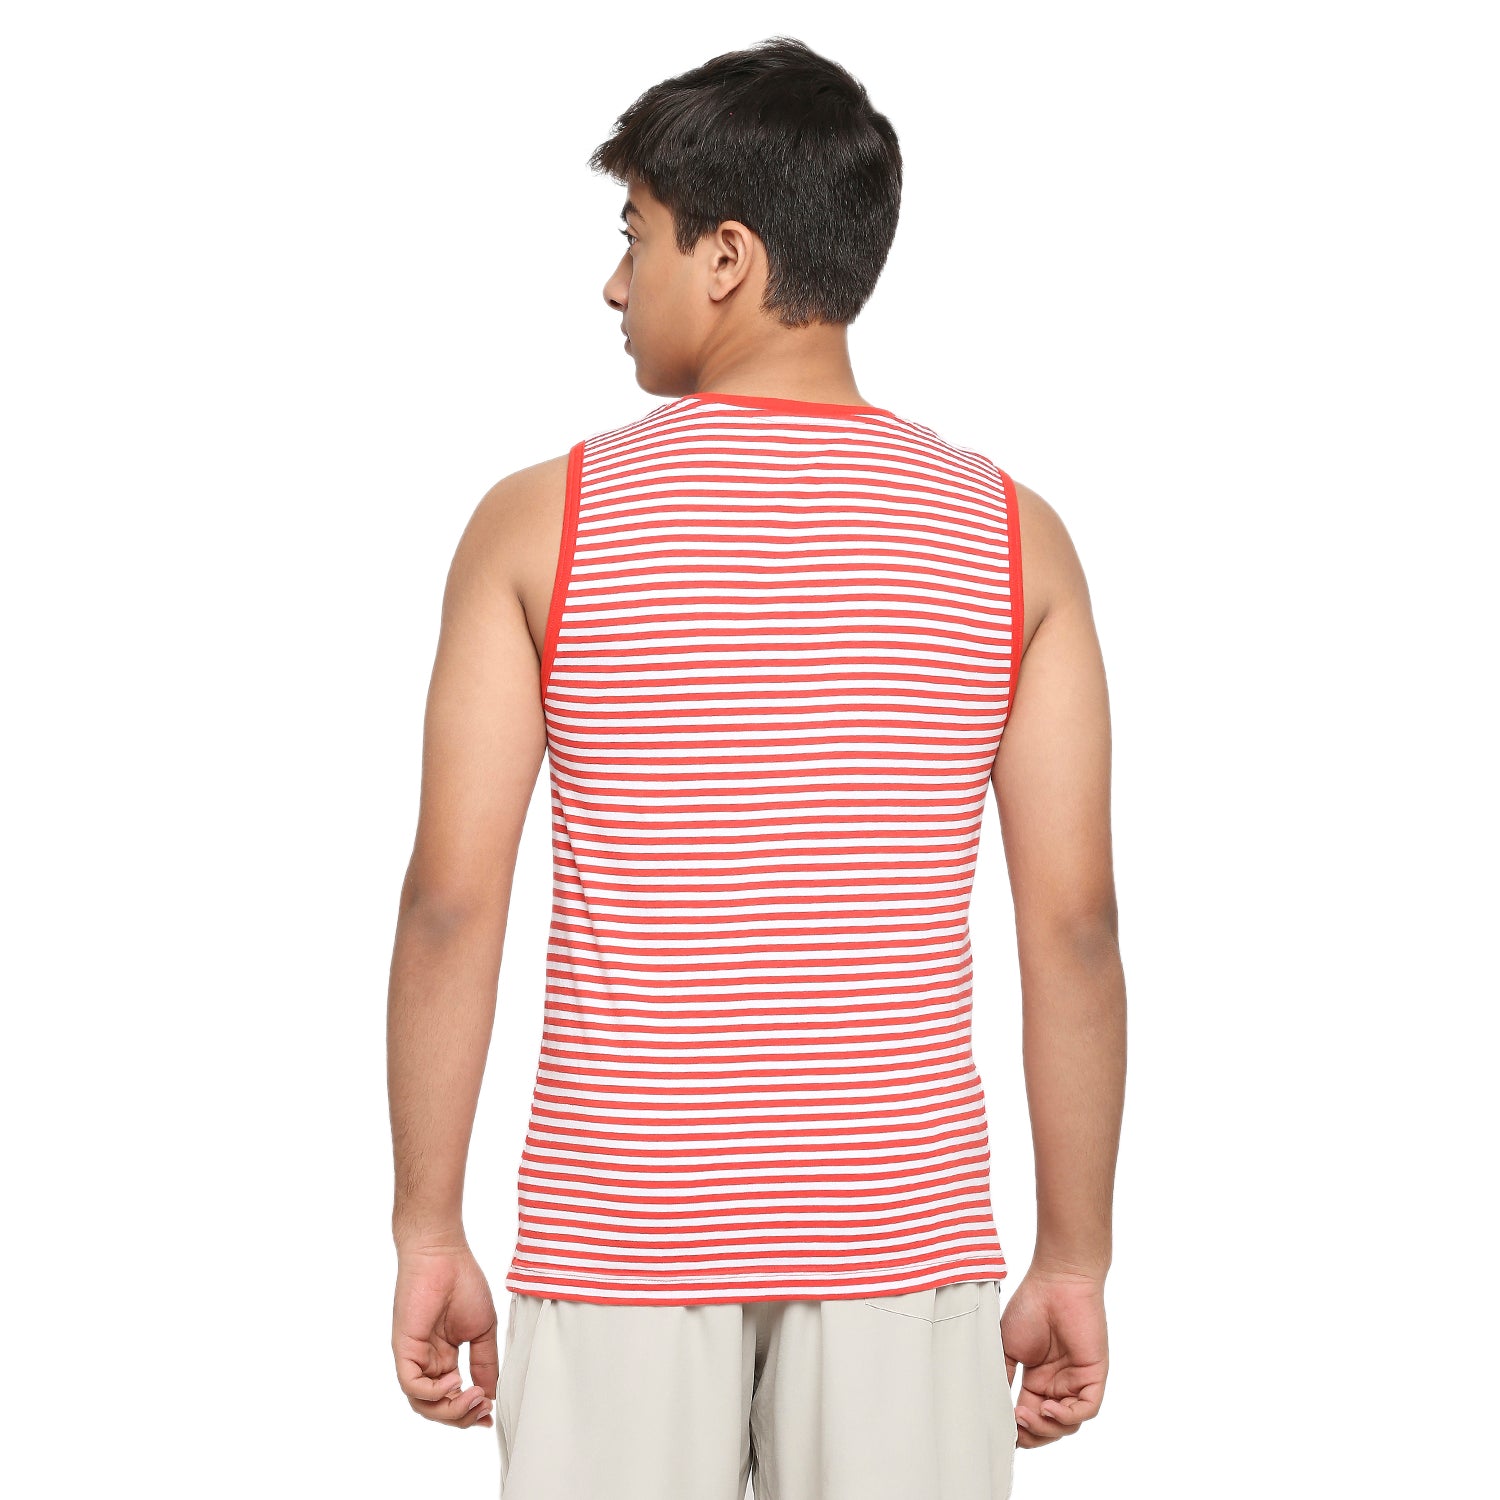 Frenchie U-19 Teens Red Striped Vest made in Cotton Lycra Fabric